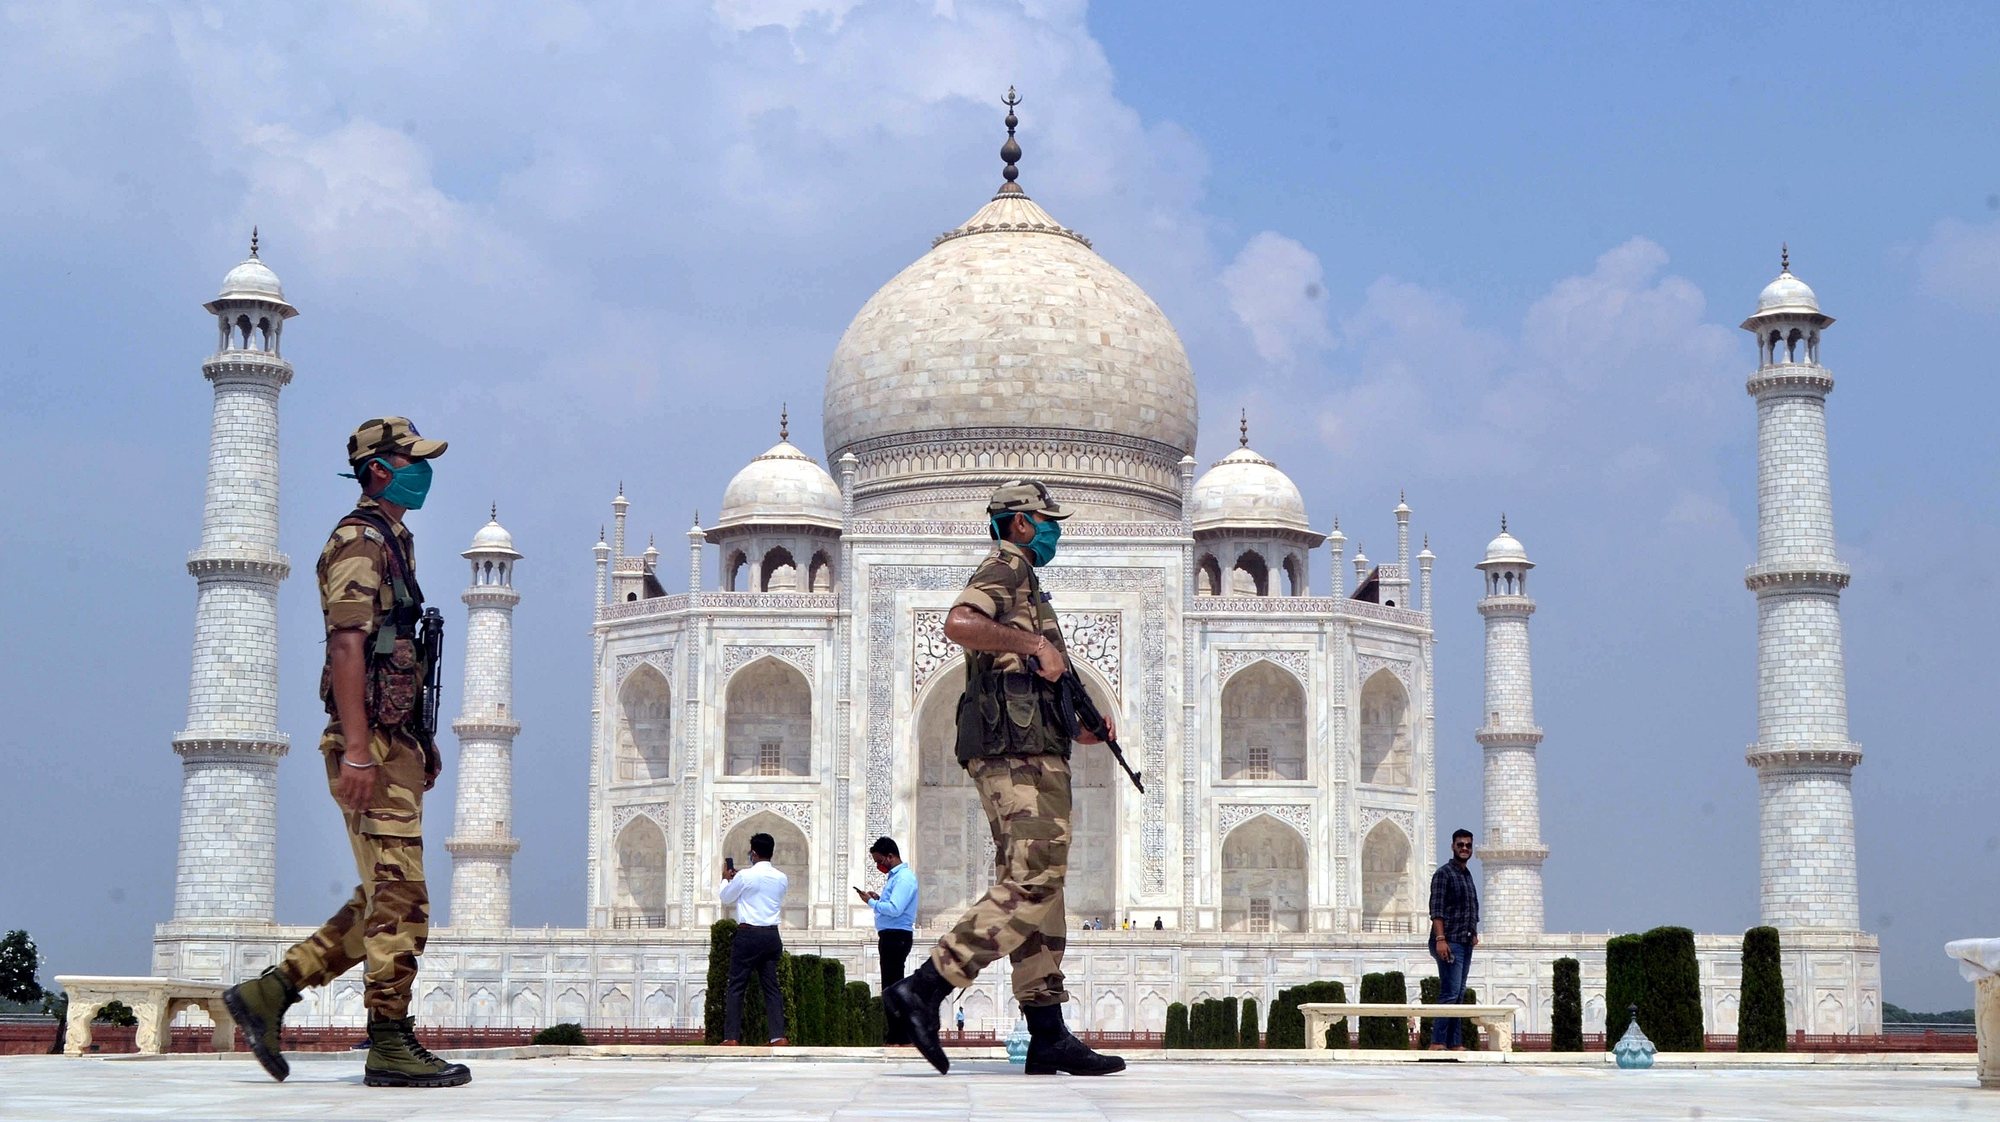 epa08685840 Indian security personnel stand guard at the Taj Mahal in Agra, Uttar Pradesh, India, 21 September 2020. The Taj Mahal reopened with increased safety measures after it was closed down by the authorities for six months amid the COVID-19 pandemic.  EPA/STR